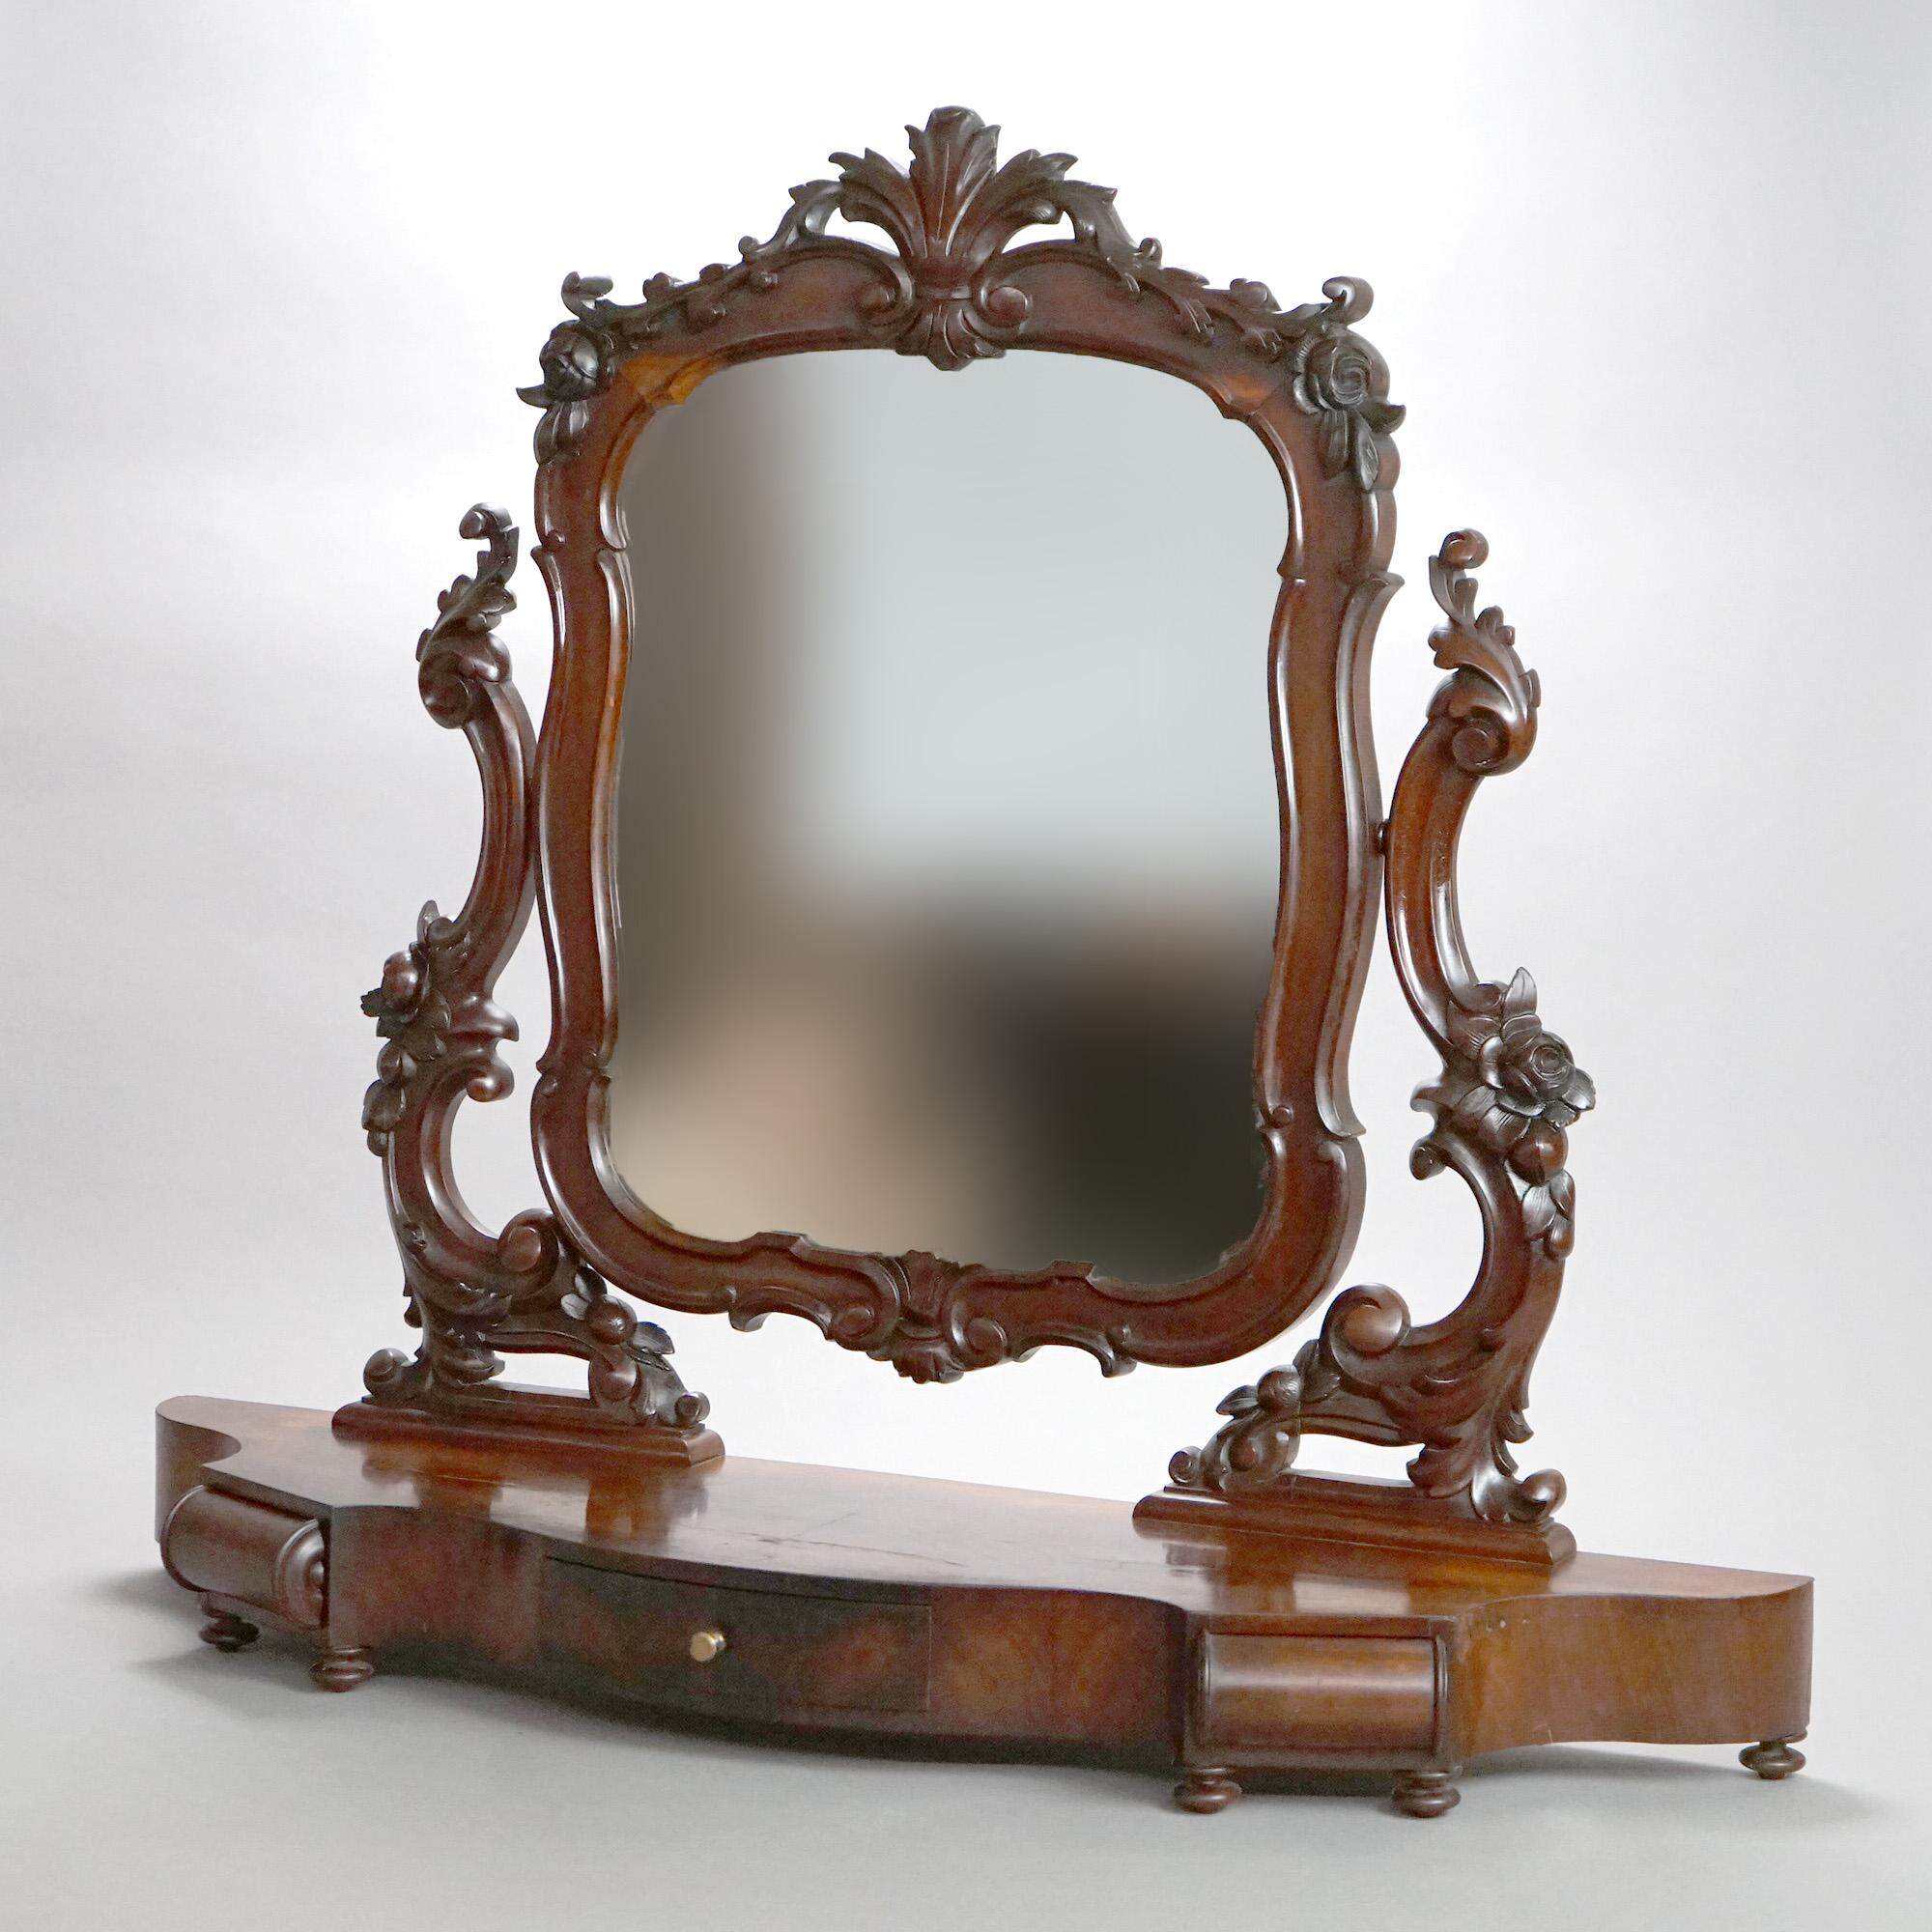 An antique Victorian Rococo shaving mirror offers flame mahogany construction with shaped mirror having carved foliate frame seated on footed base with single drawer, c1890

Measures - 31.5